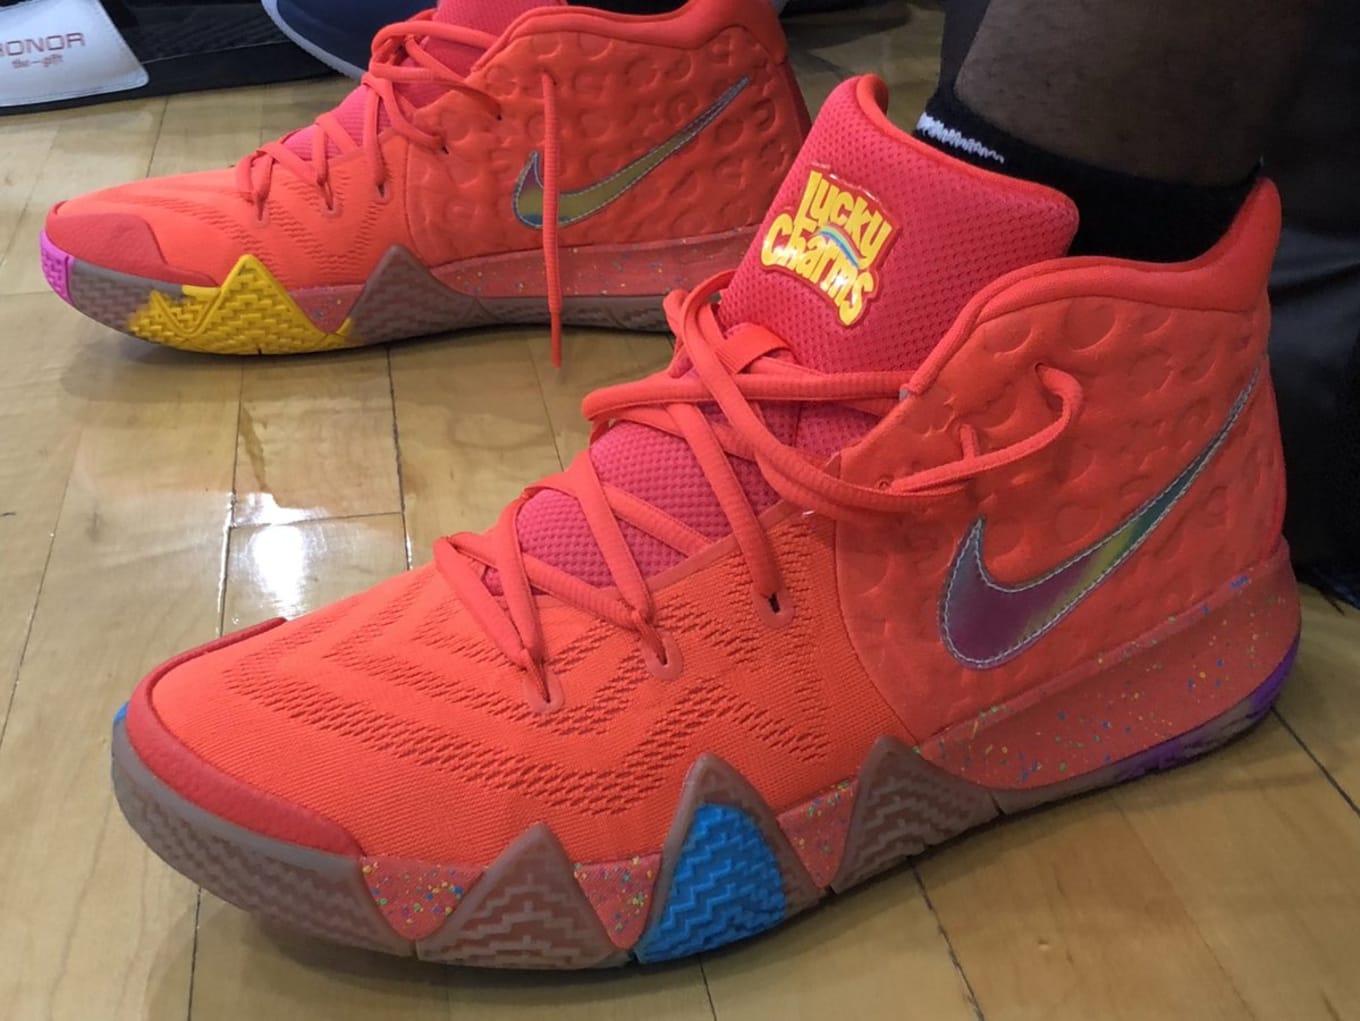 kyrie 4 shoes lucky charms